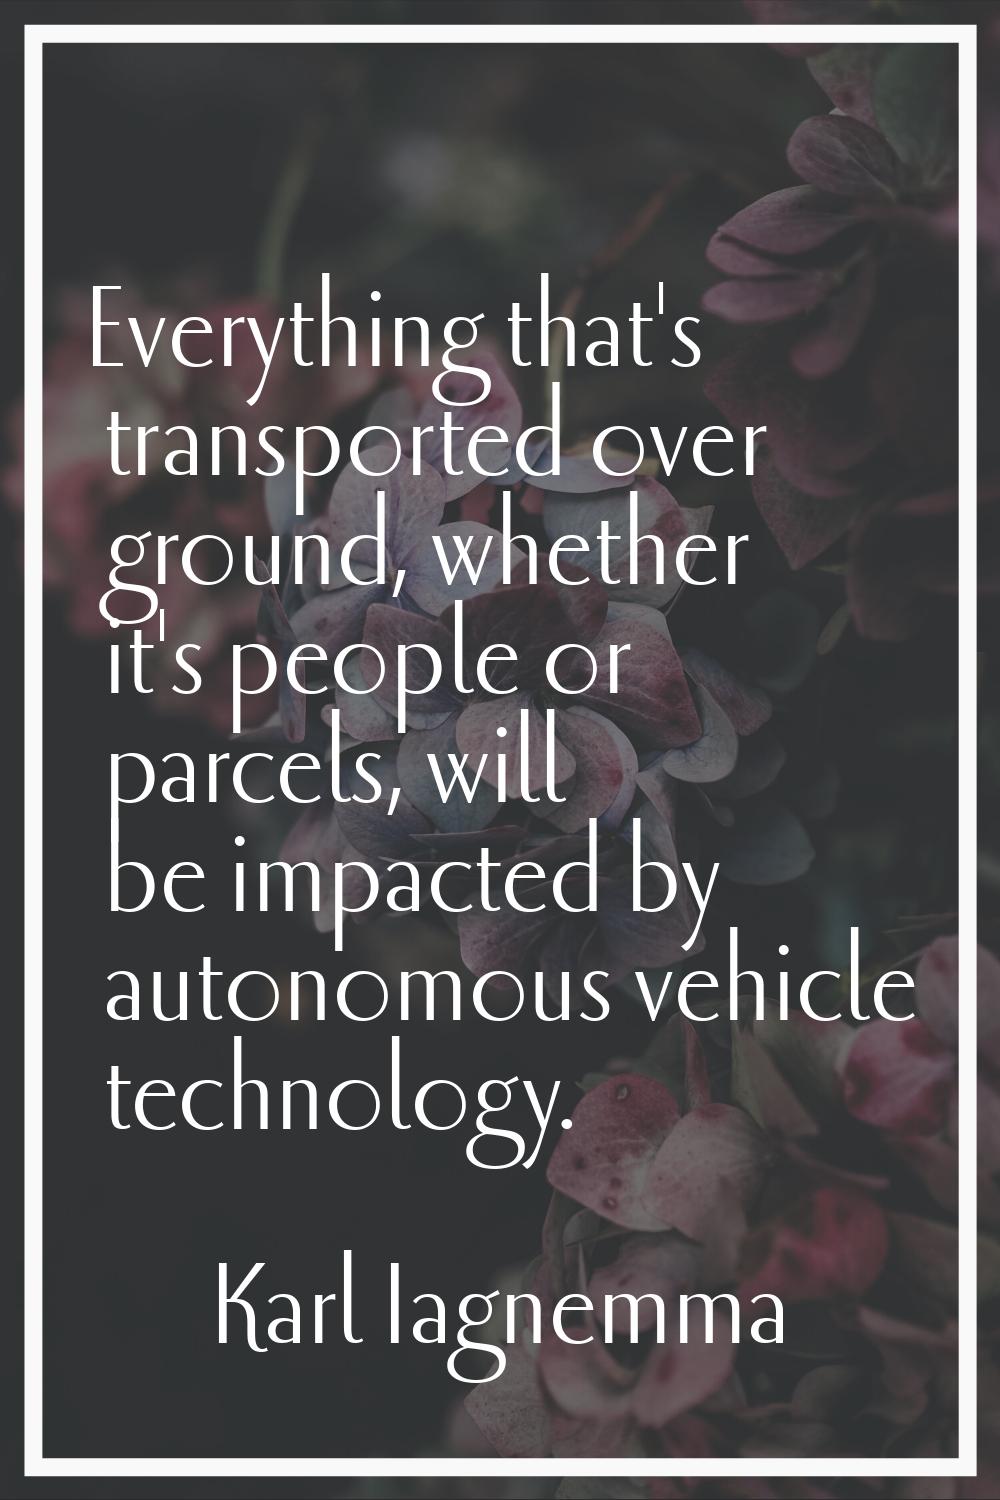 Everything that's transported over ground, whether it's people or parcels, will be impacted by auto